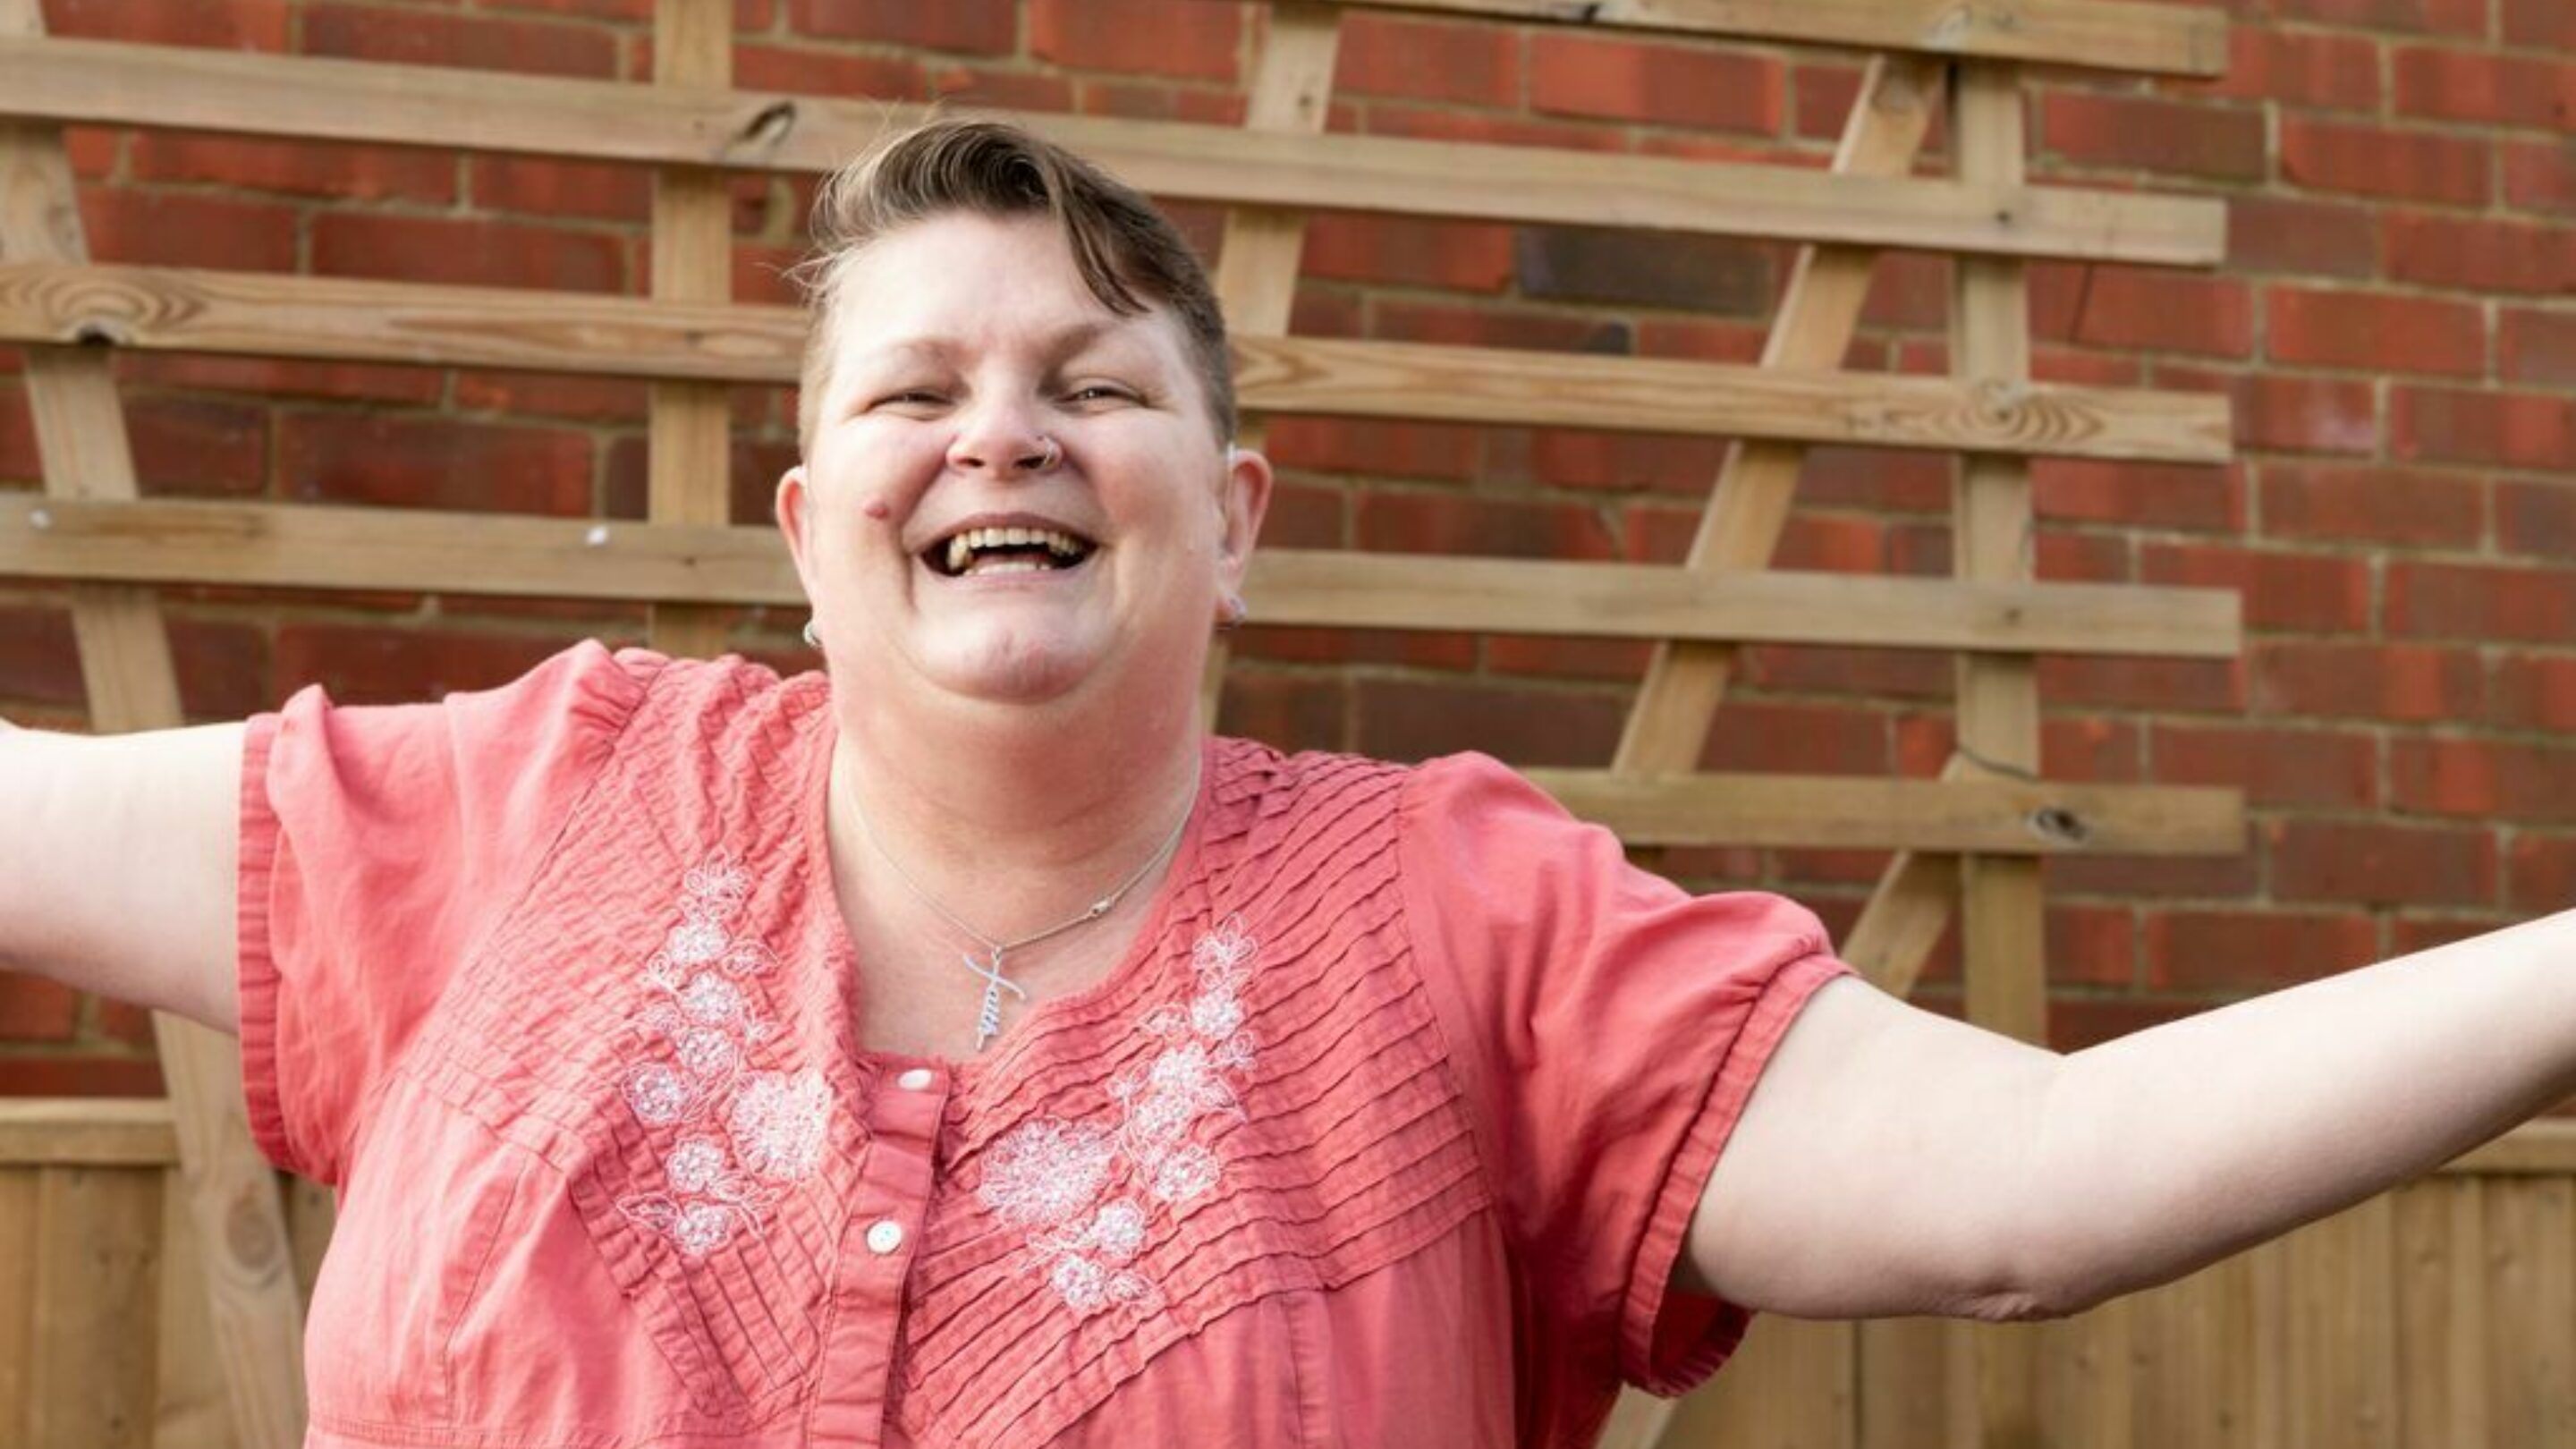 Toni, a white lady with short brown/red hair and a pink short-sleeved shirt, is a former CAP client, now debt free. She is smiling at the camera with her arms flung wide.